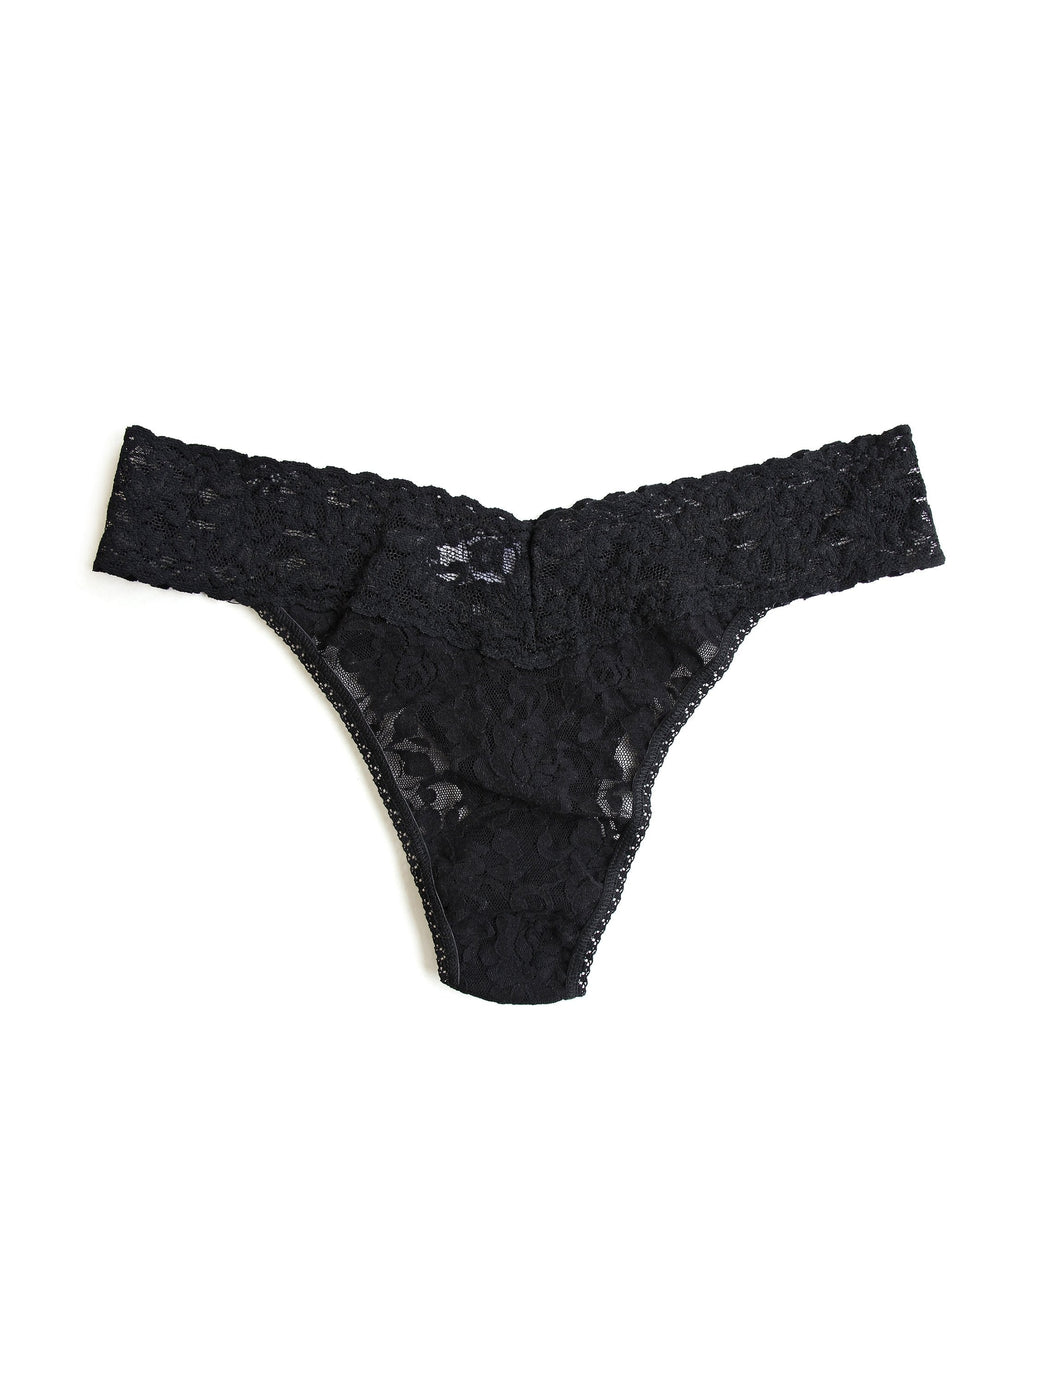 Hanky Panky Original Rise Thong Black front view product image